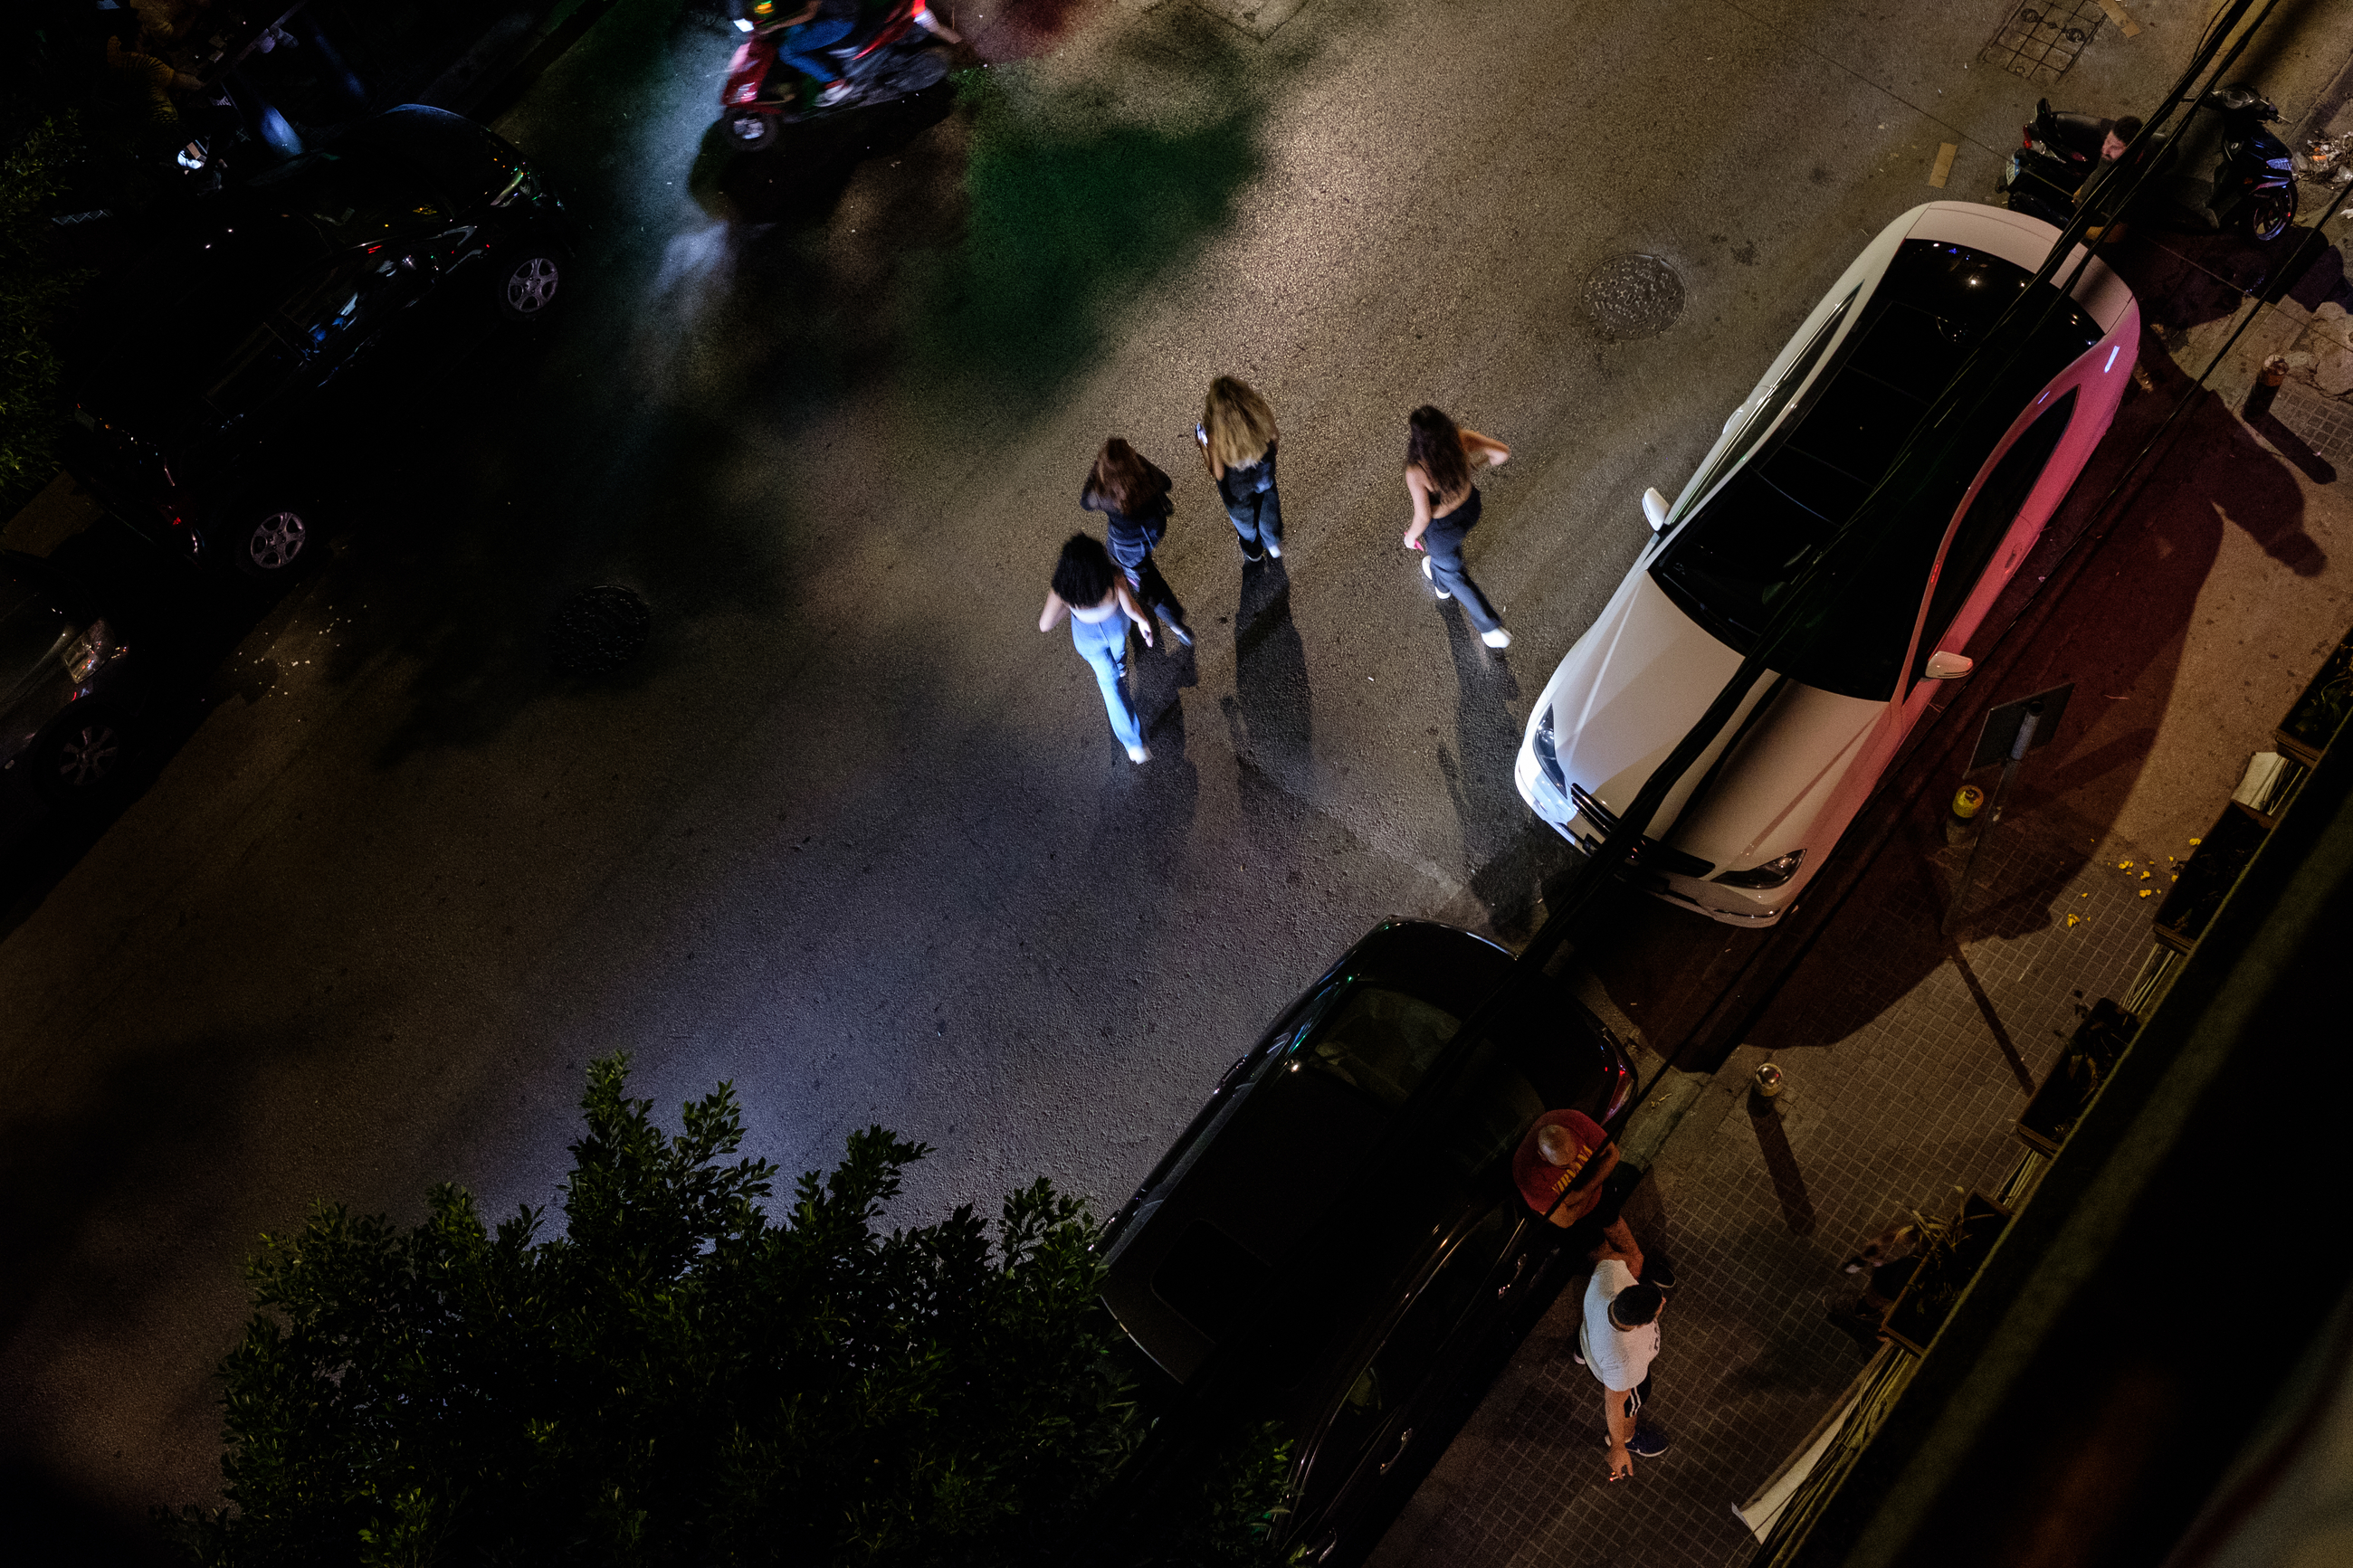 Four women cross the street of Gemmayze during the night, surrounded by cars parked on the side of the road.